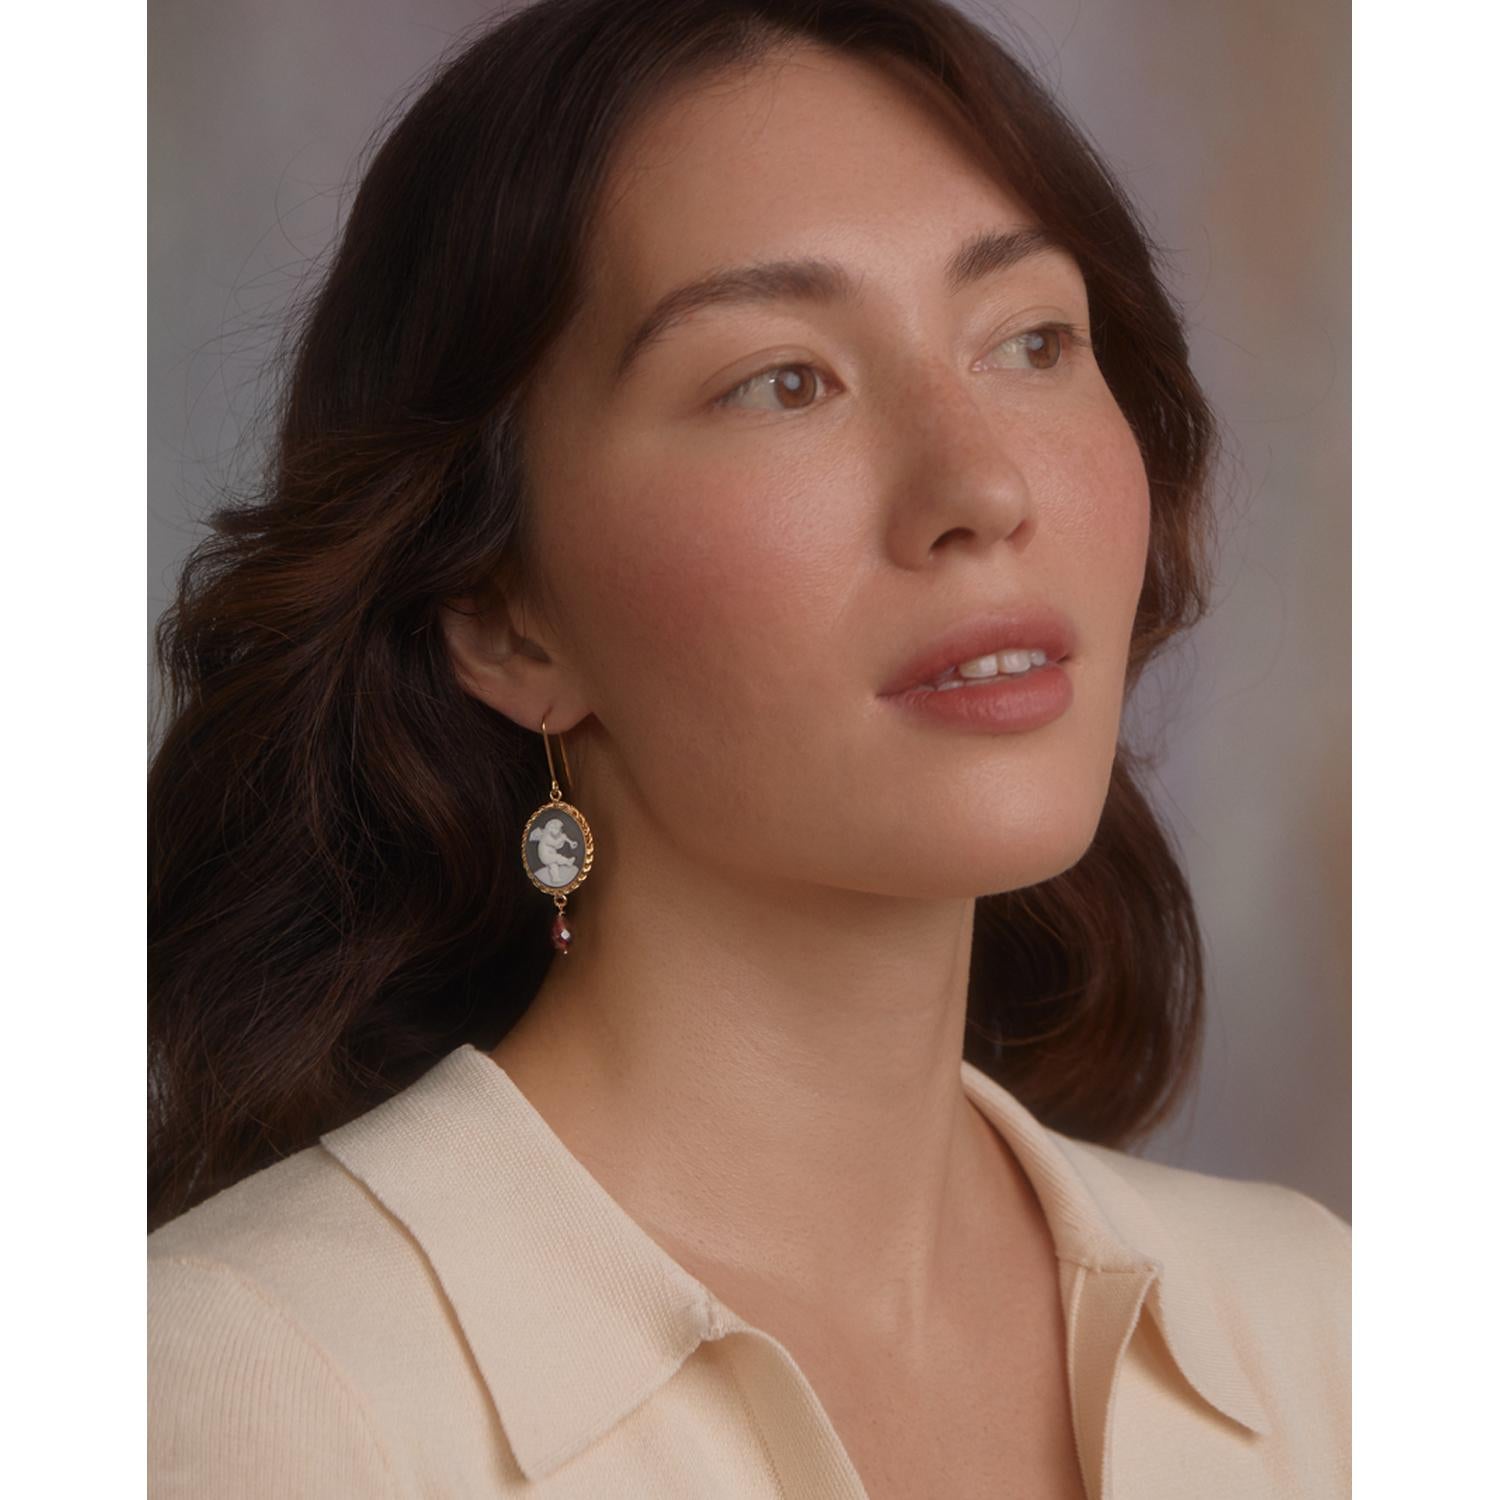 The Playing Angels cameo earrings by Vintouch Jewels are designed to celebrate the artistic heritage of Baroque that has shaped the landscapes of Southern Italy, the homeland of the brand. Handmade from 18-karat gold-plated silver, these earrings